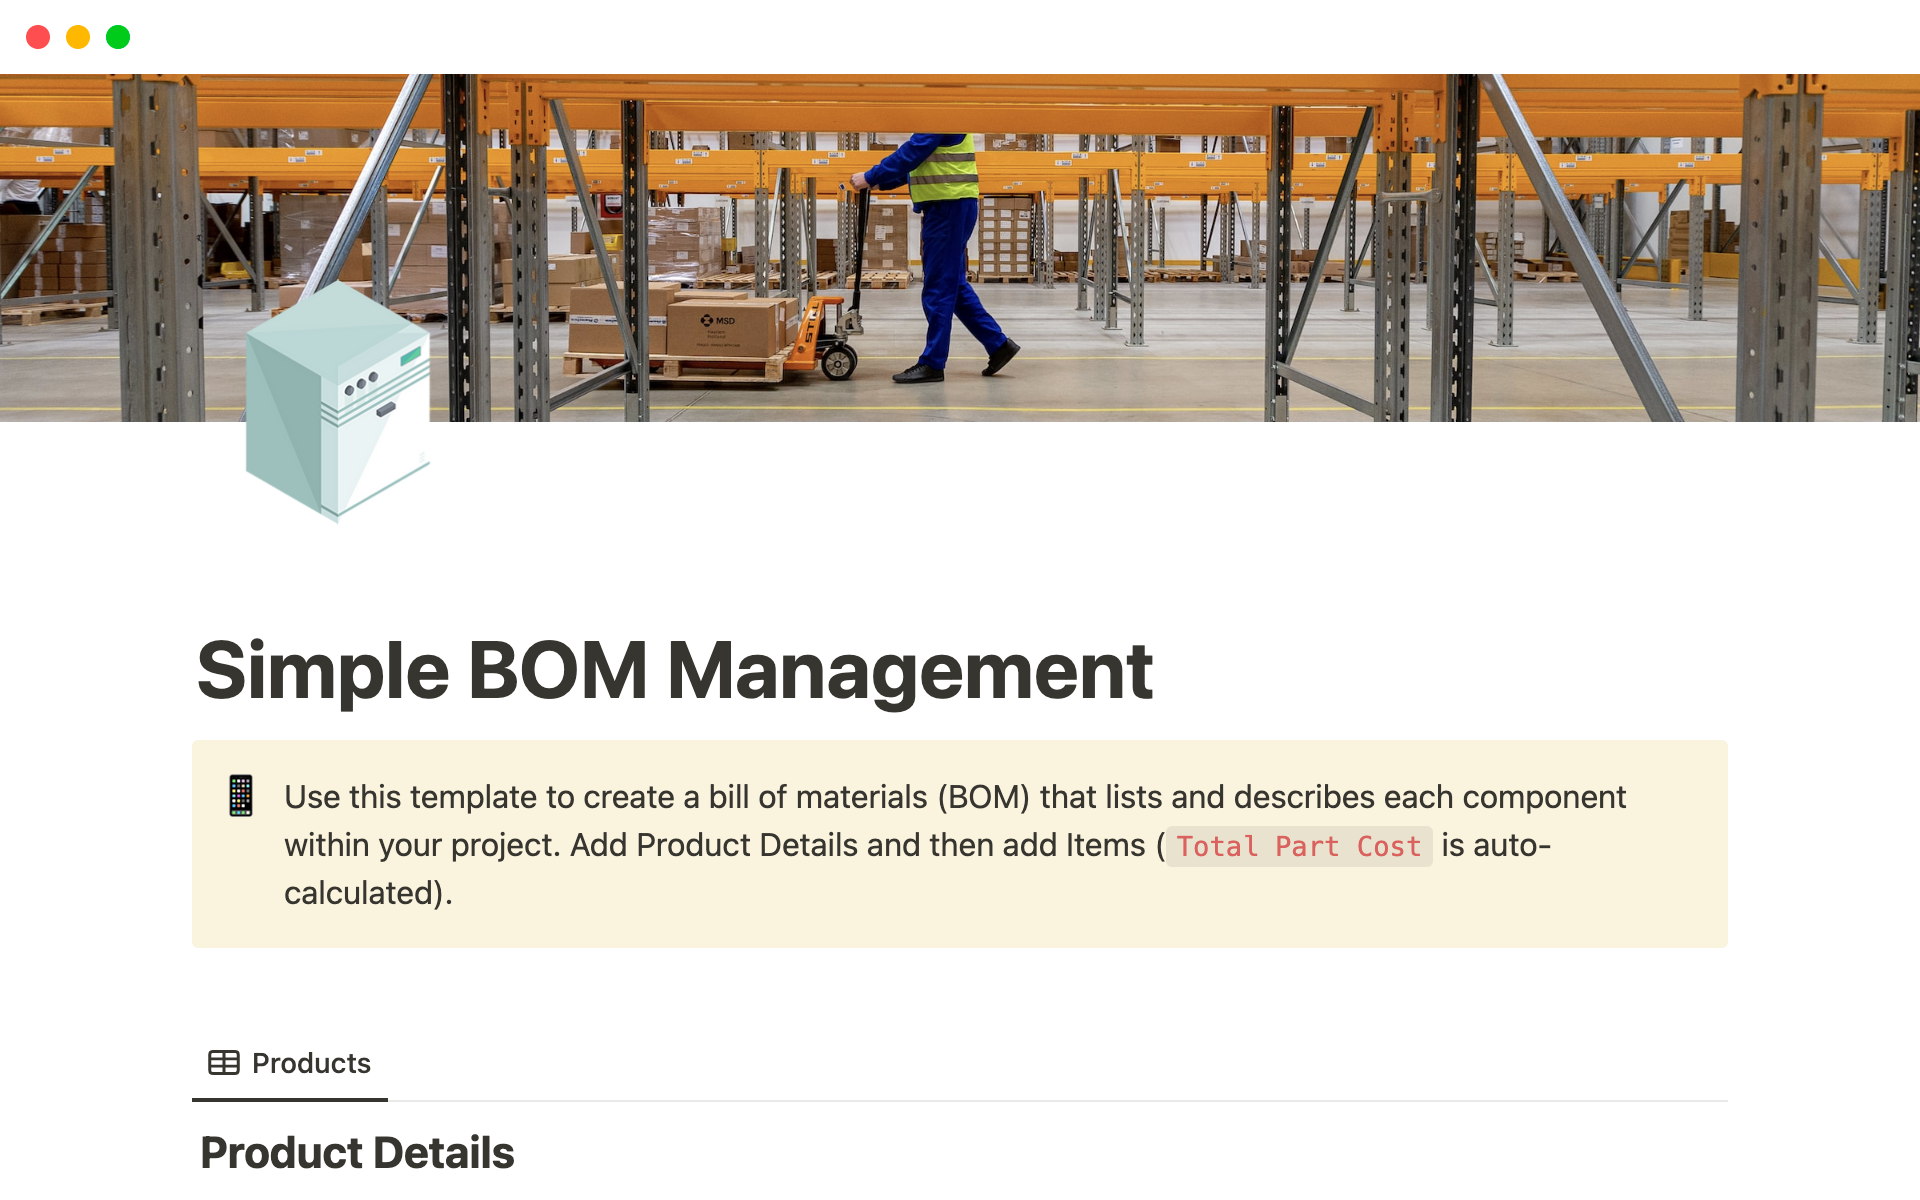 Use this template to create a bill of materials (BOM) that lists and describes each component within your project.